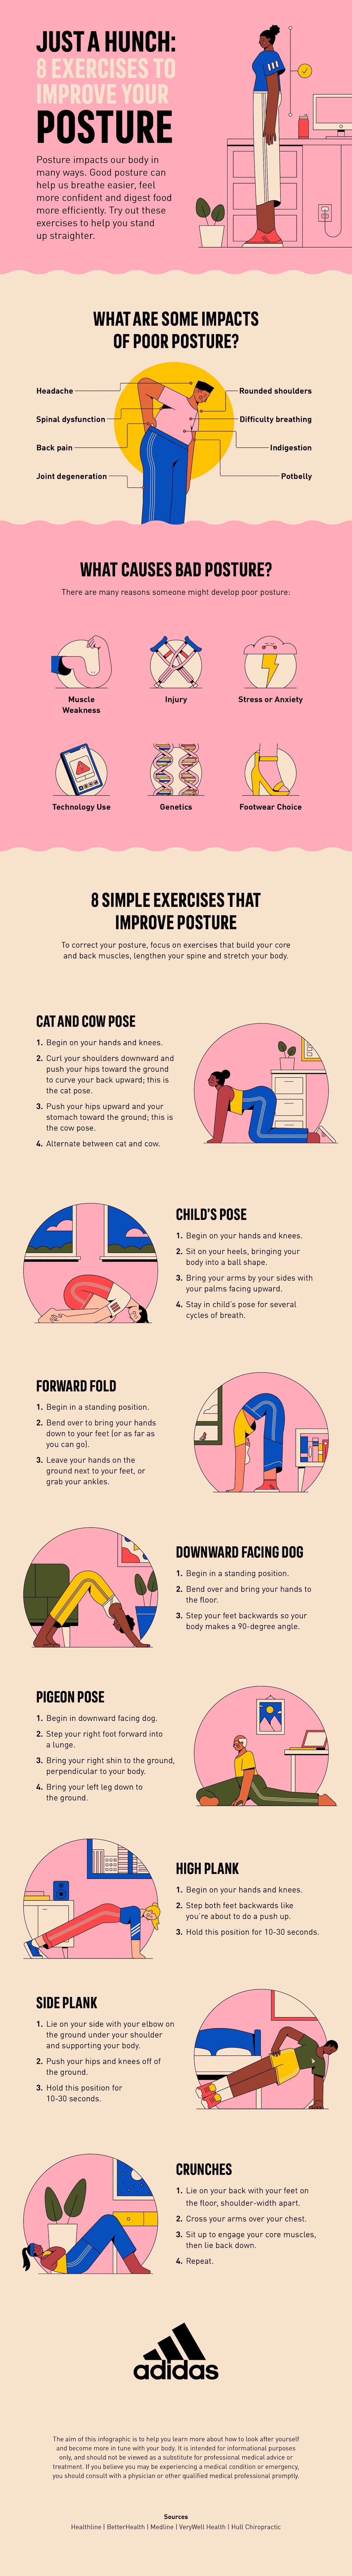 Exercise to improve posture. Infographic courtesy of Adidas.